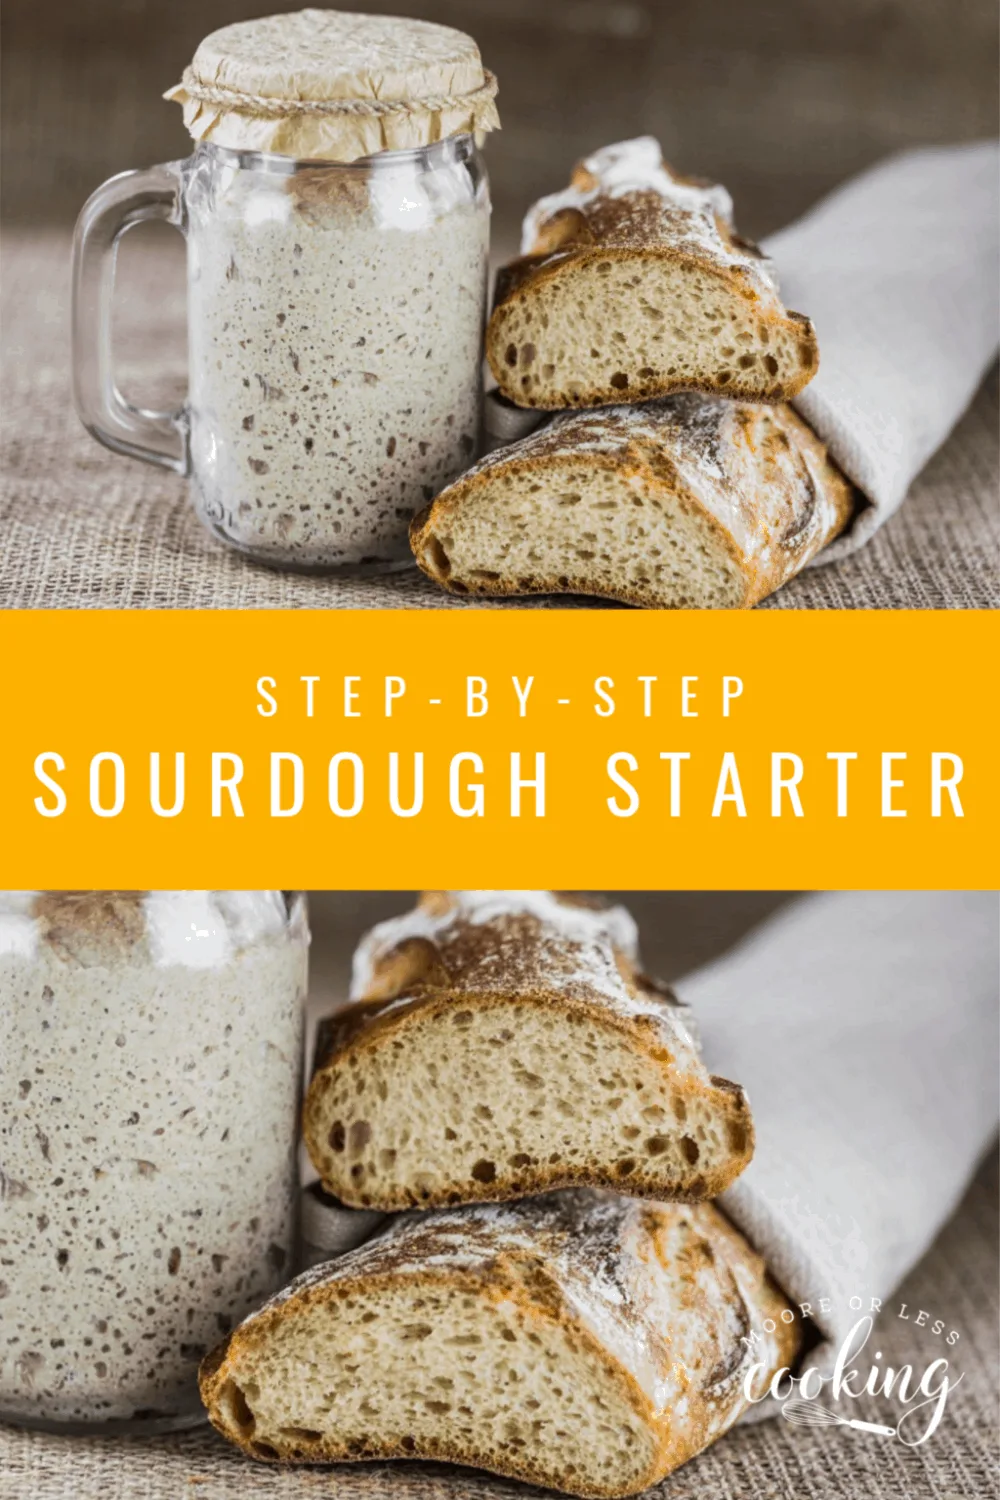 No Yeast? No Problem! Here's How to Make Sourdough Bread Starter Without Yeast! #sourdoughstarter #mooreorlesscooking #noyeast #bread #easyrecipes #sourdough via @Mooreorlesscook